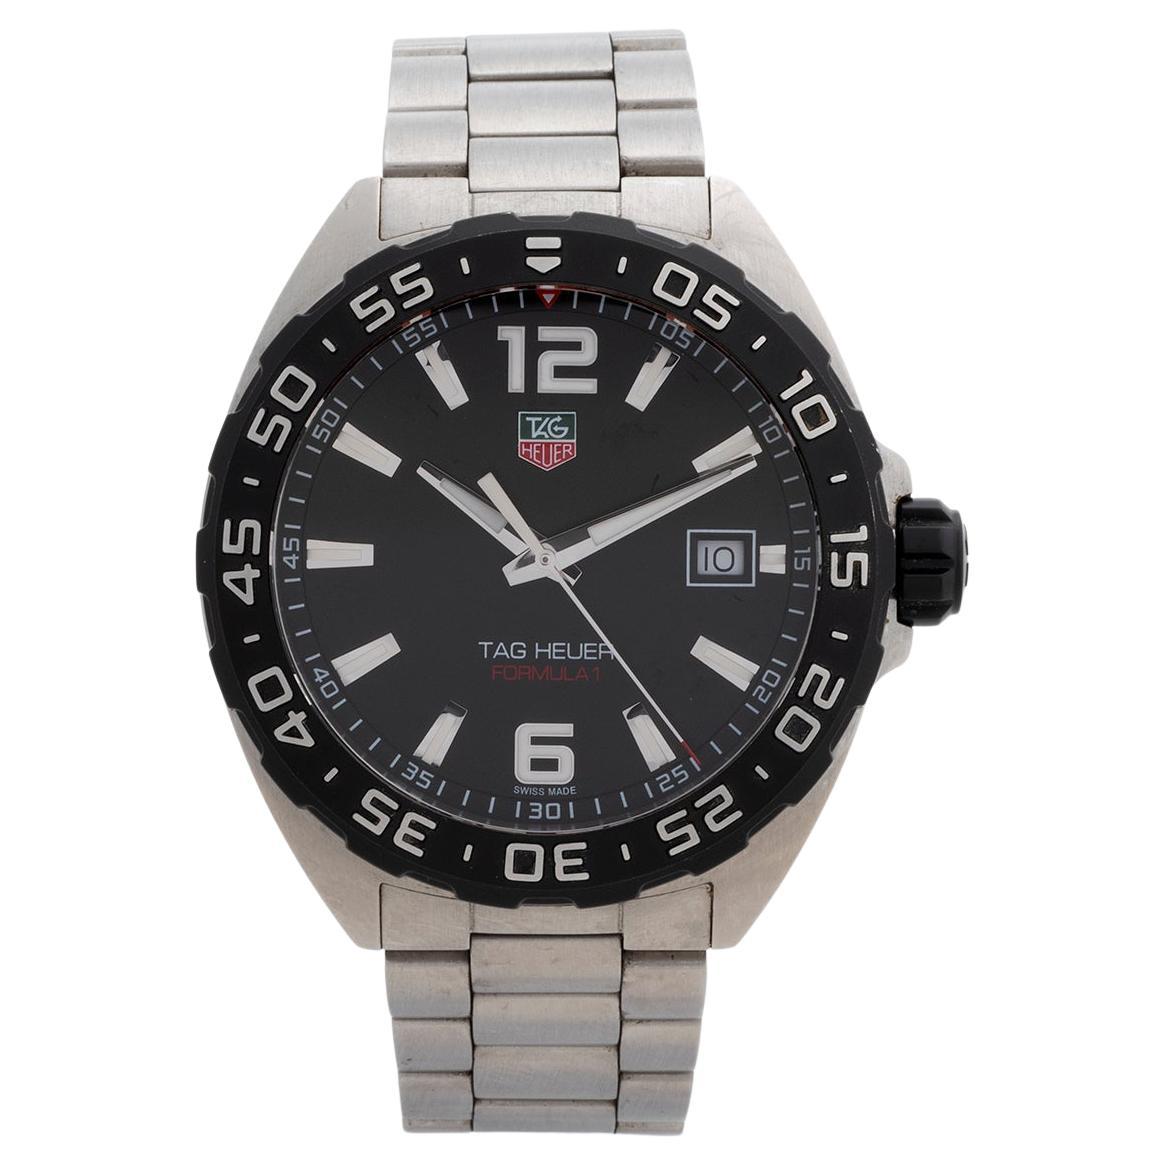 Our Tag Heuer Formula 1 reference WAZ1110 with quartz movement features a stainless steel 41mm case with stainless steel bracelet, and black dial . A instantly recognisable sports watch, this example comes with neither box nor papers but a